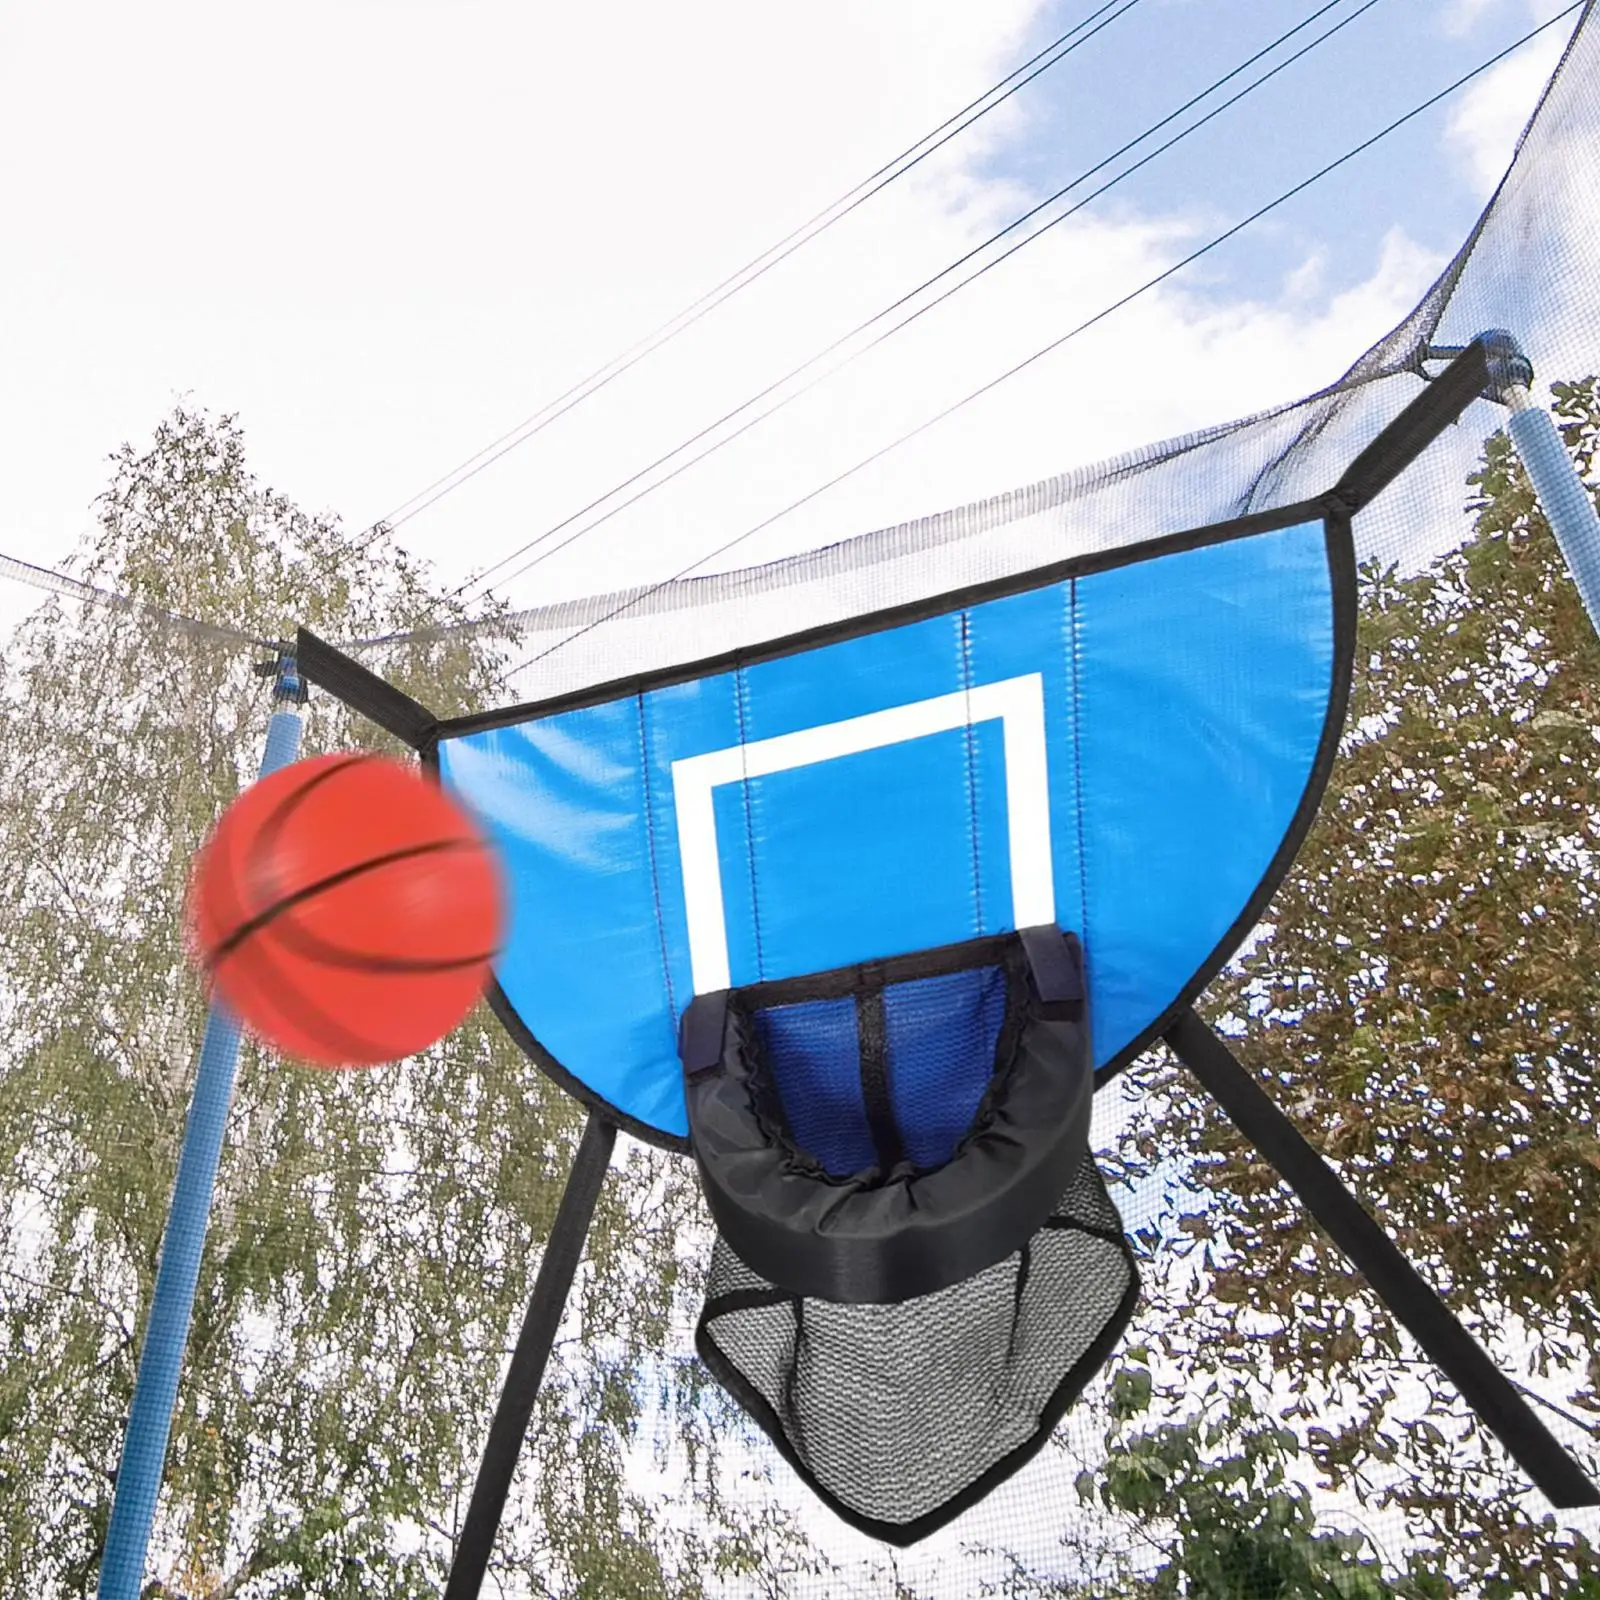 Mini Trampoline Basketball Hoop with Small Basketball Trampoline Accessories Mini Basketball Hoop for Trampoline with Enclosure